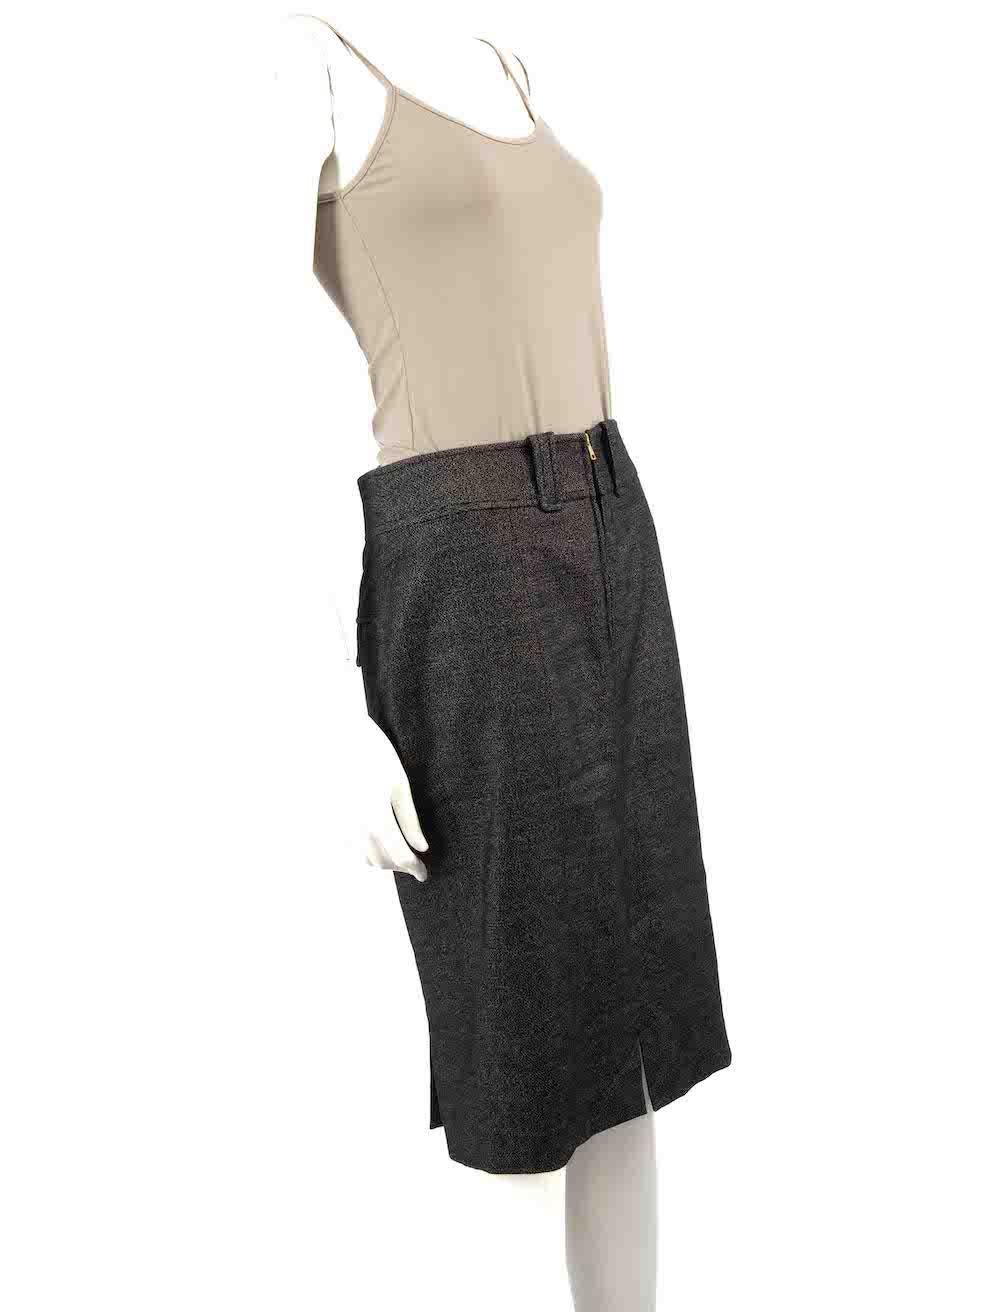 CONDITION is Very good. Hardly any visible wear to skirt is evident on this used Tom Ford designer resale item.
 
 
 
 Details
 
 
 Grey
 
 Wool
 
 Pencil skirt
 
 Knee length
 
 Front zip fastening
 
 2x Back pockets
 
 
 
 
 
 Made in Italy
 
 
 
